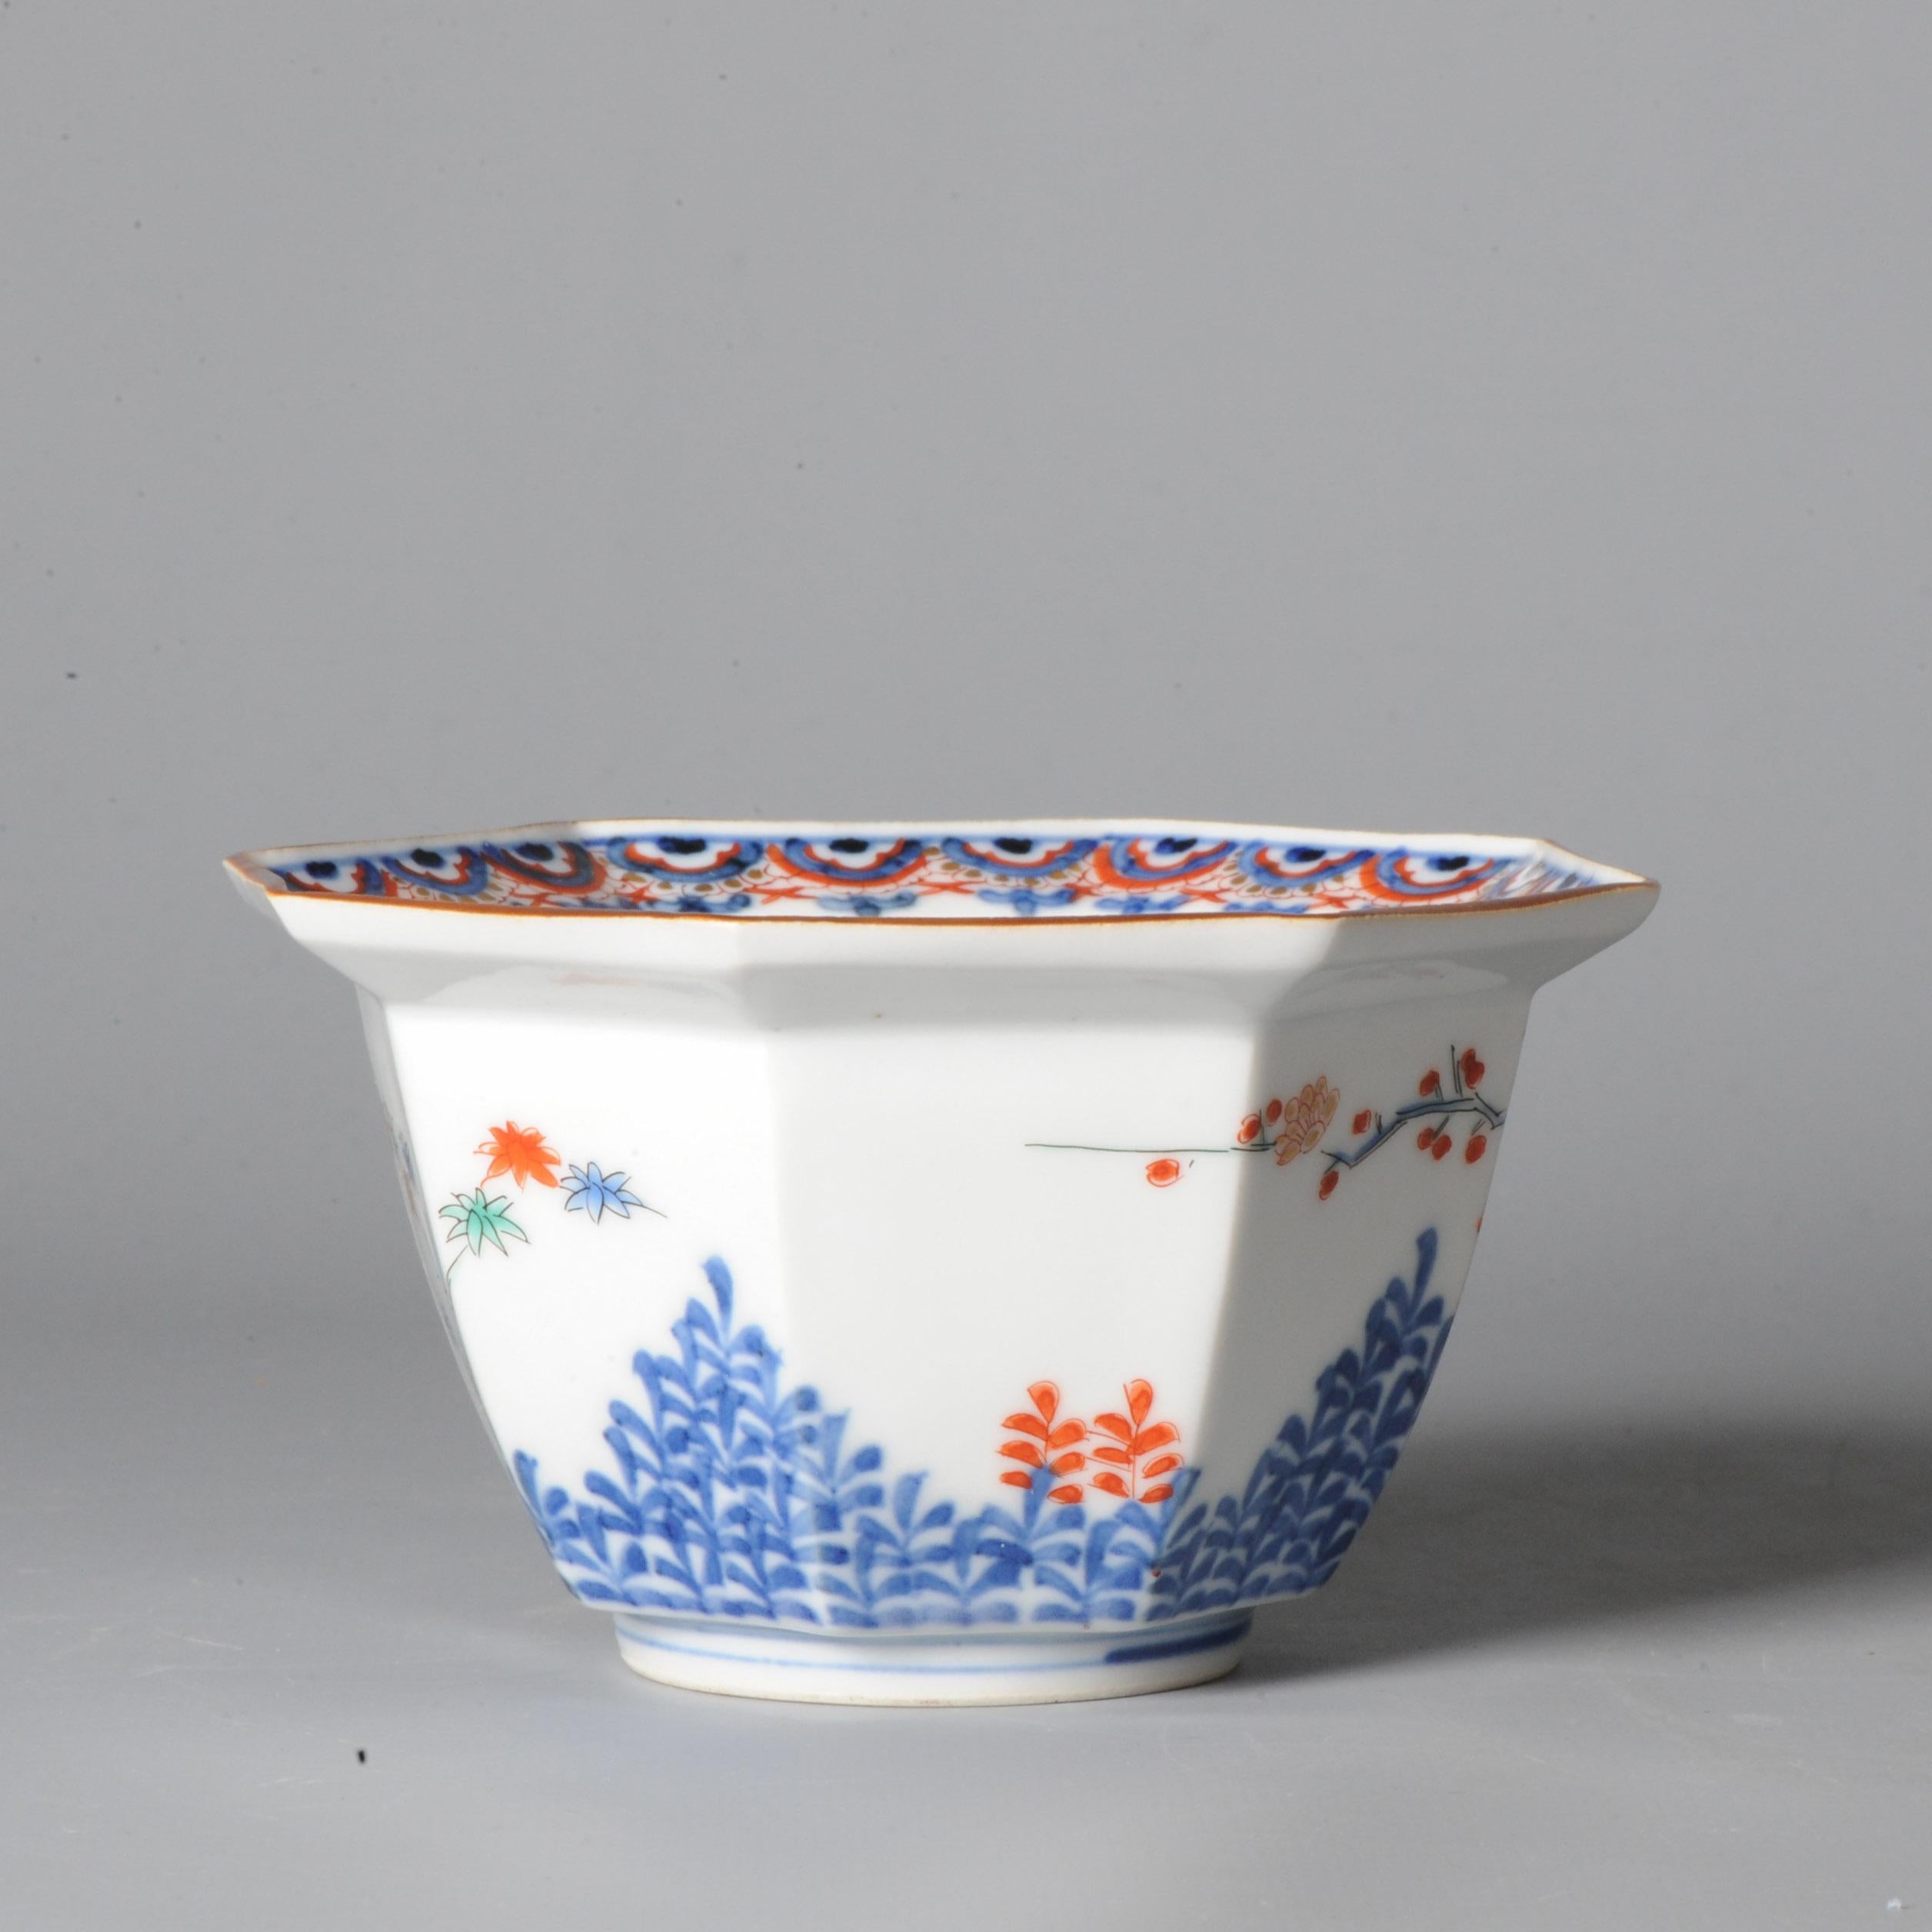 Edo Period 17c Japanese Porcelain Bowl Kakiemon Leafs Flowers Bamboo In Good Condition For Sale In Amsterdam, Noord Holland